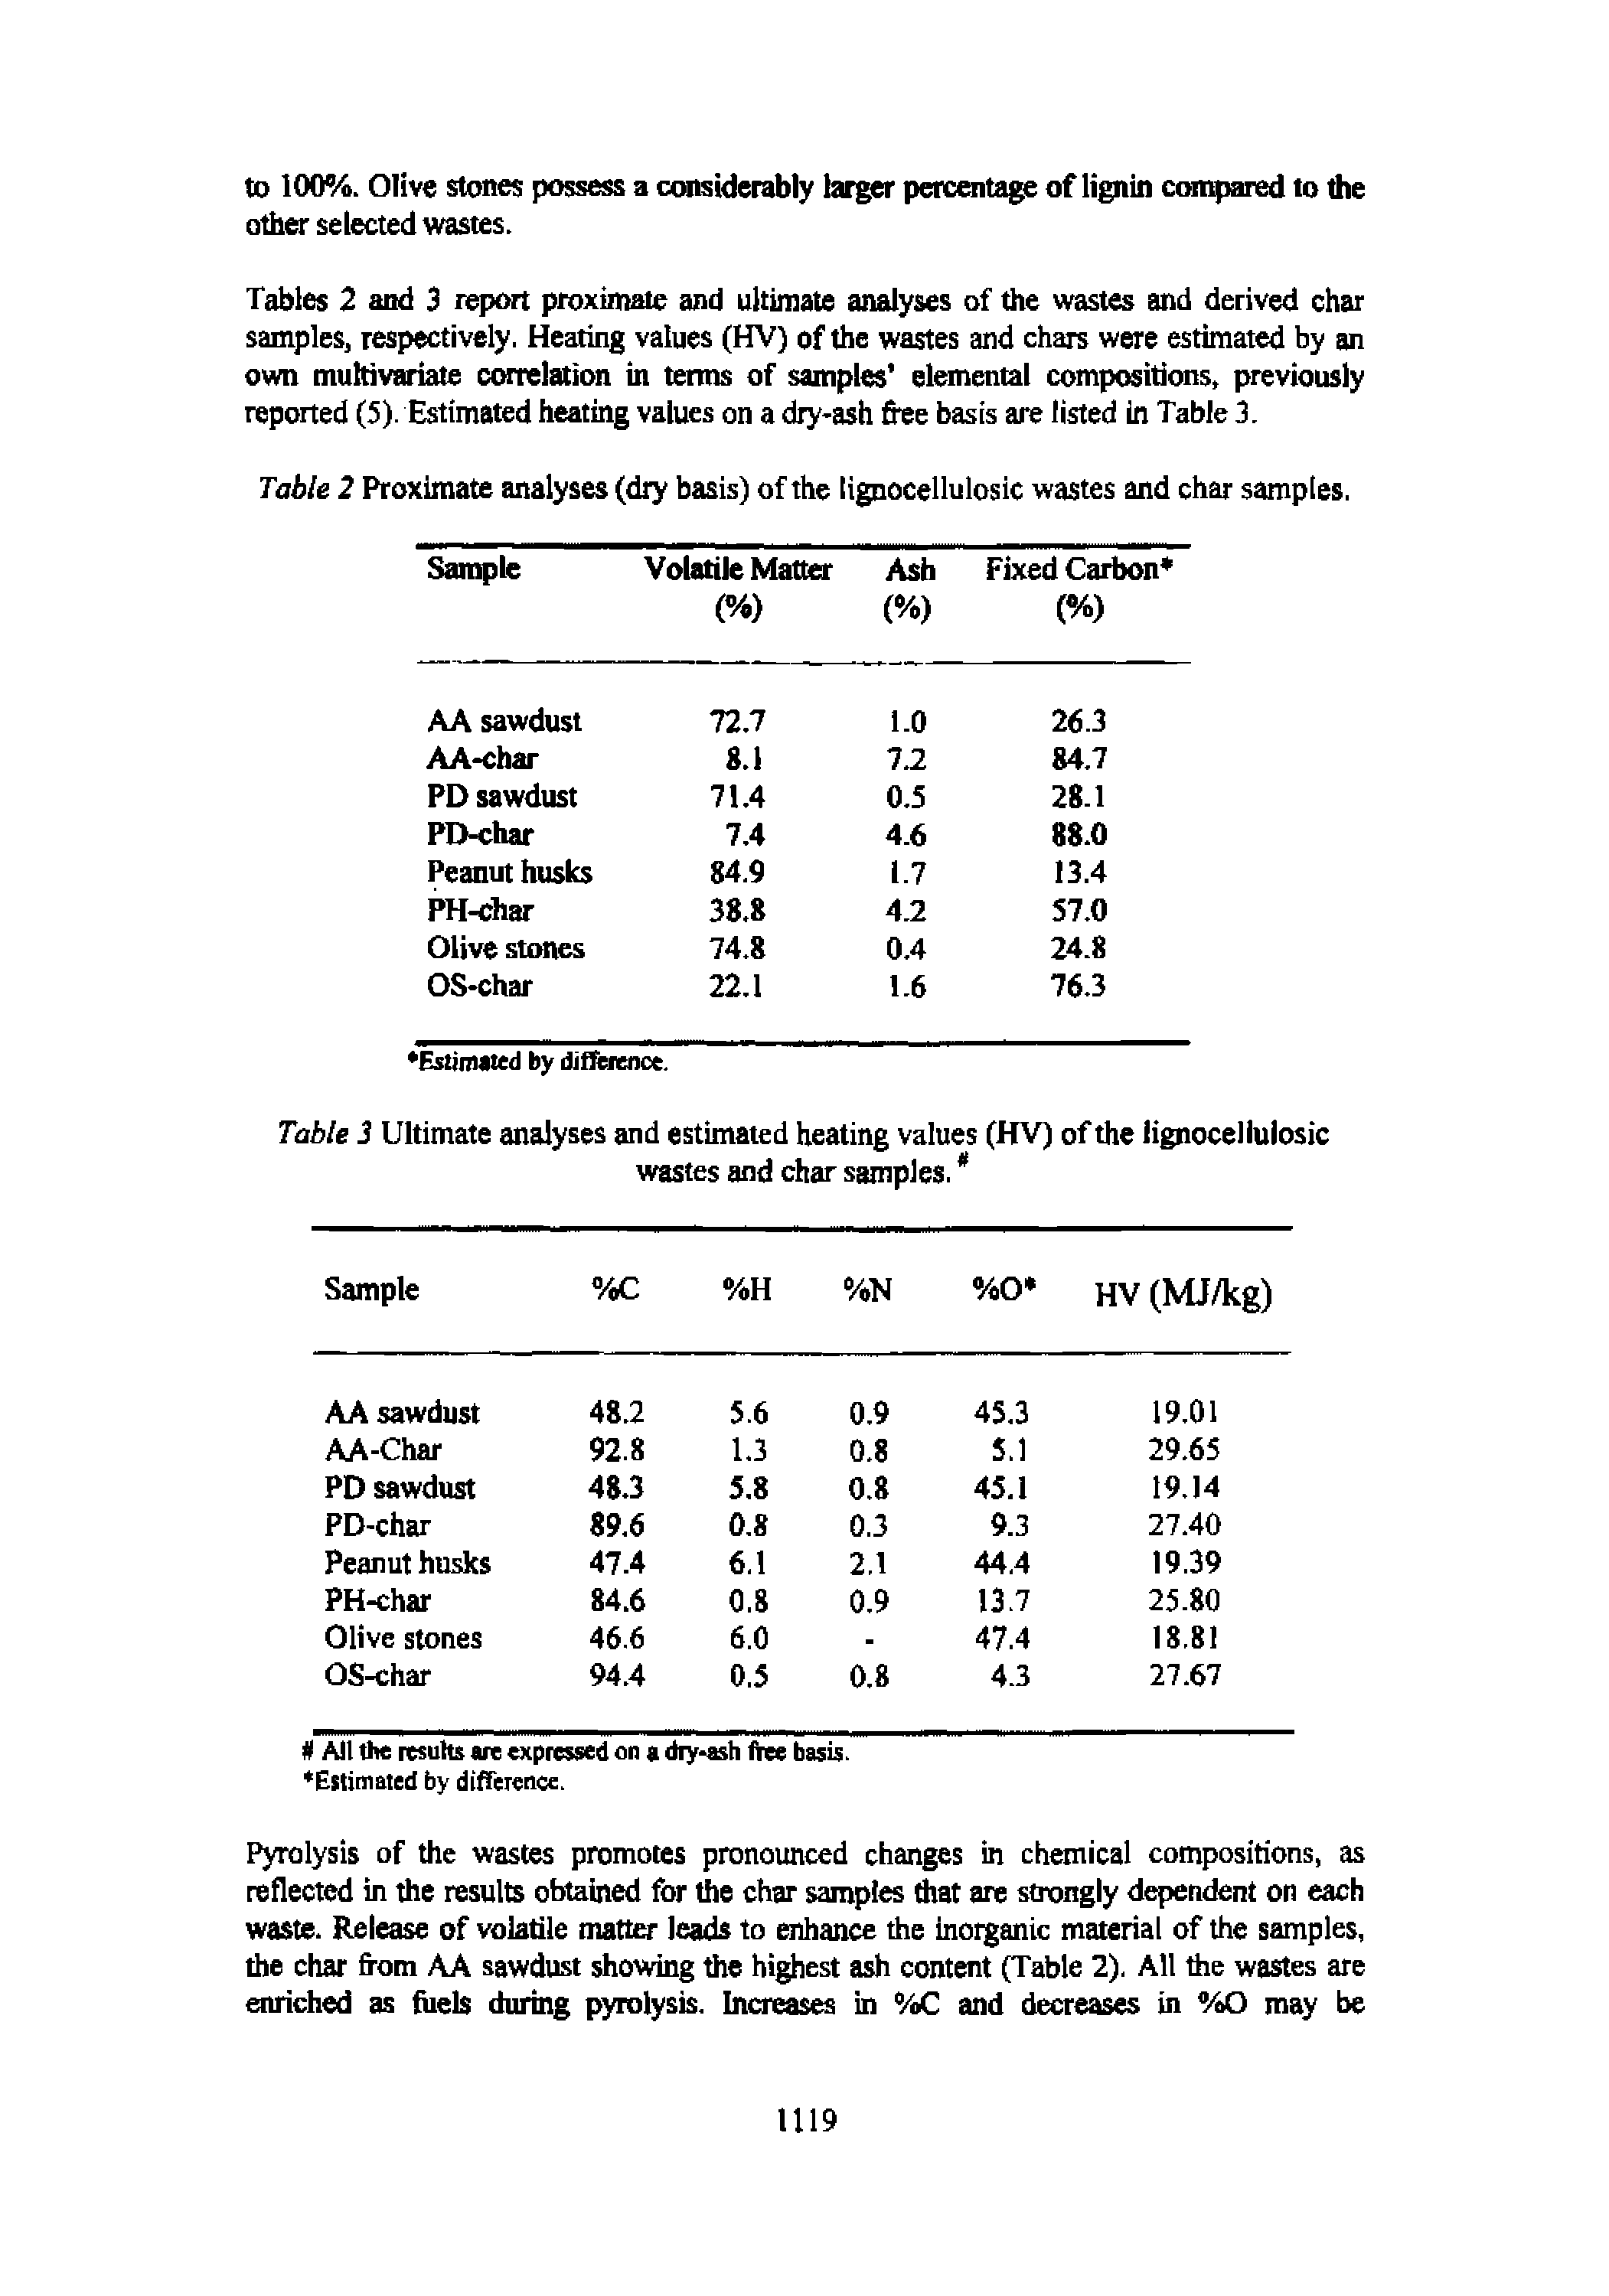 Tables 2 and 3 report proximate and ultimate analyses of the wastes and derived char sampleS) respectively. Heating values (HV) of the wastes and chars were estimated by an own multivariate correlation in terms of samples elemental compositions, previously reported (5). Estimated heating values on a diy-ash free basis are listed in Table 3.